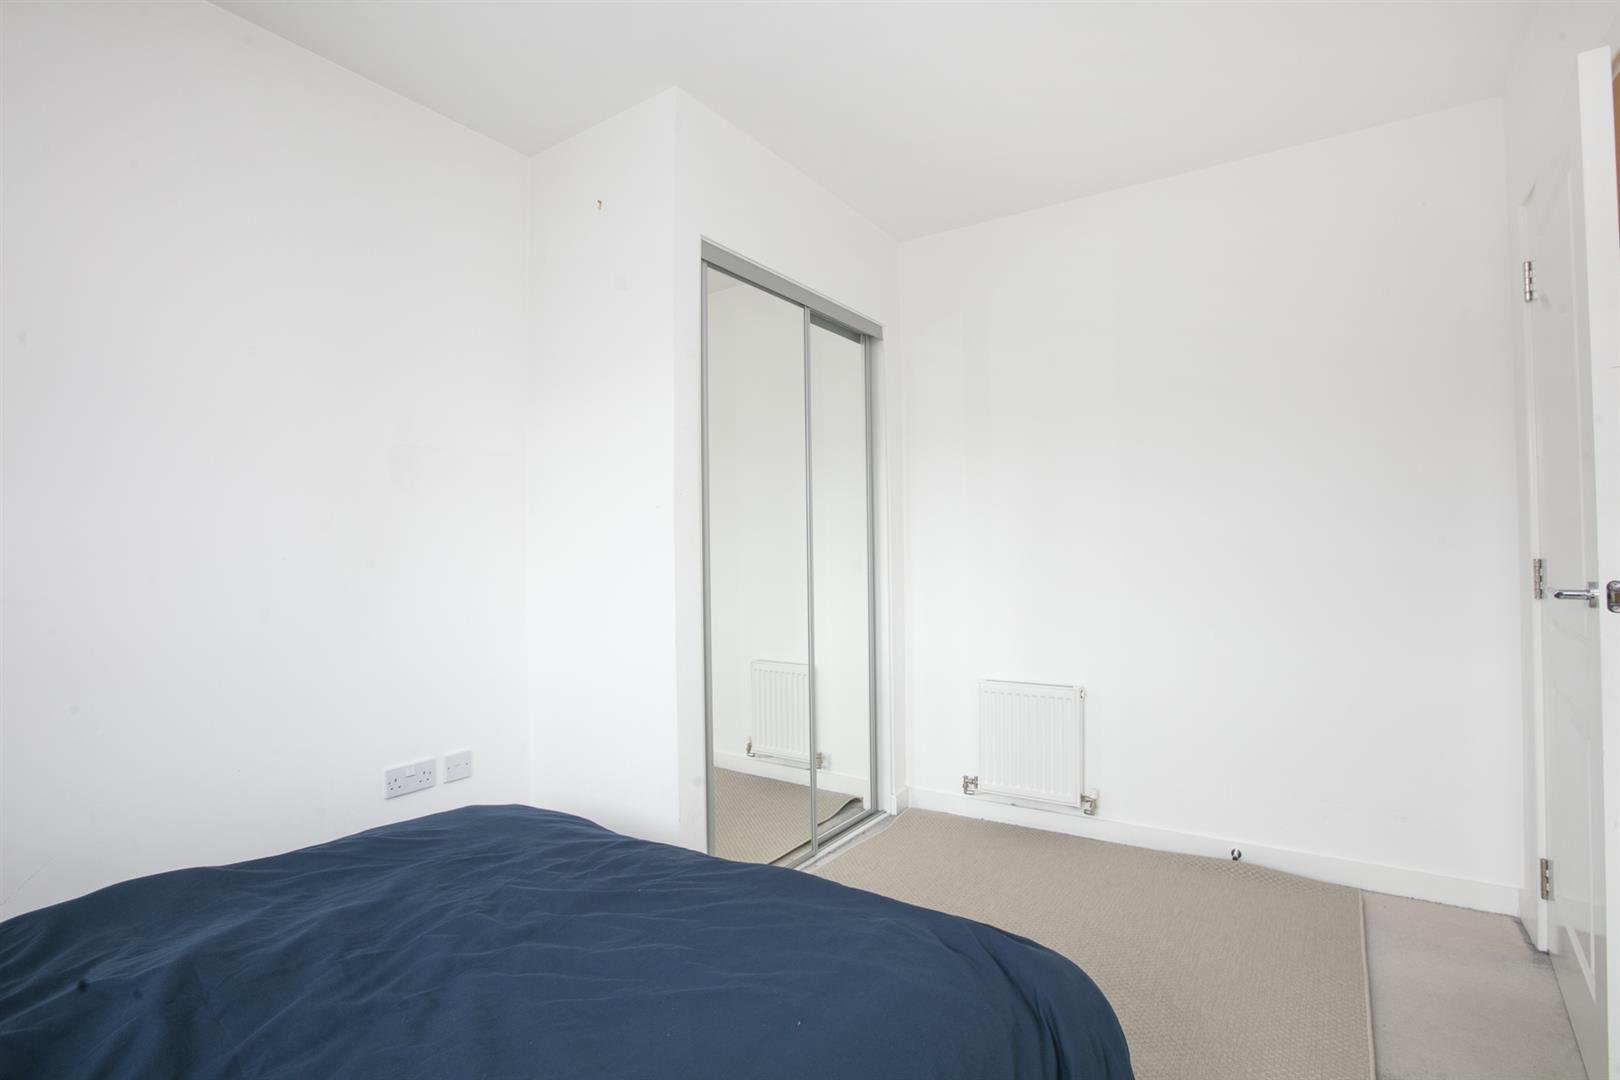 Flat - Purpose Built For Sale in Benhill Road, Camberwell, SE5 928 view10